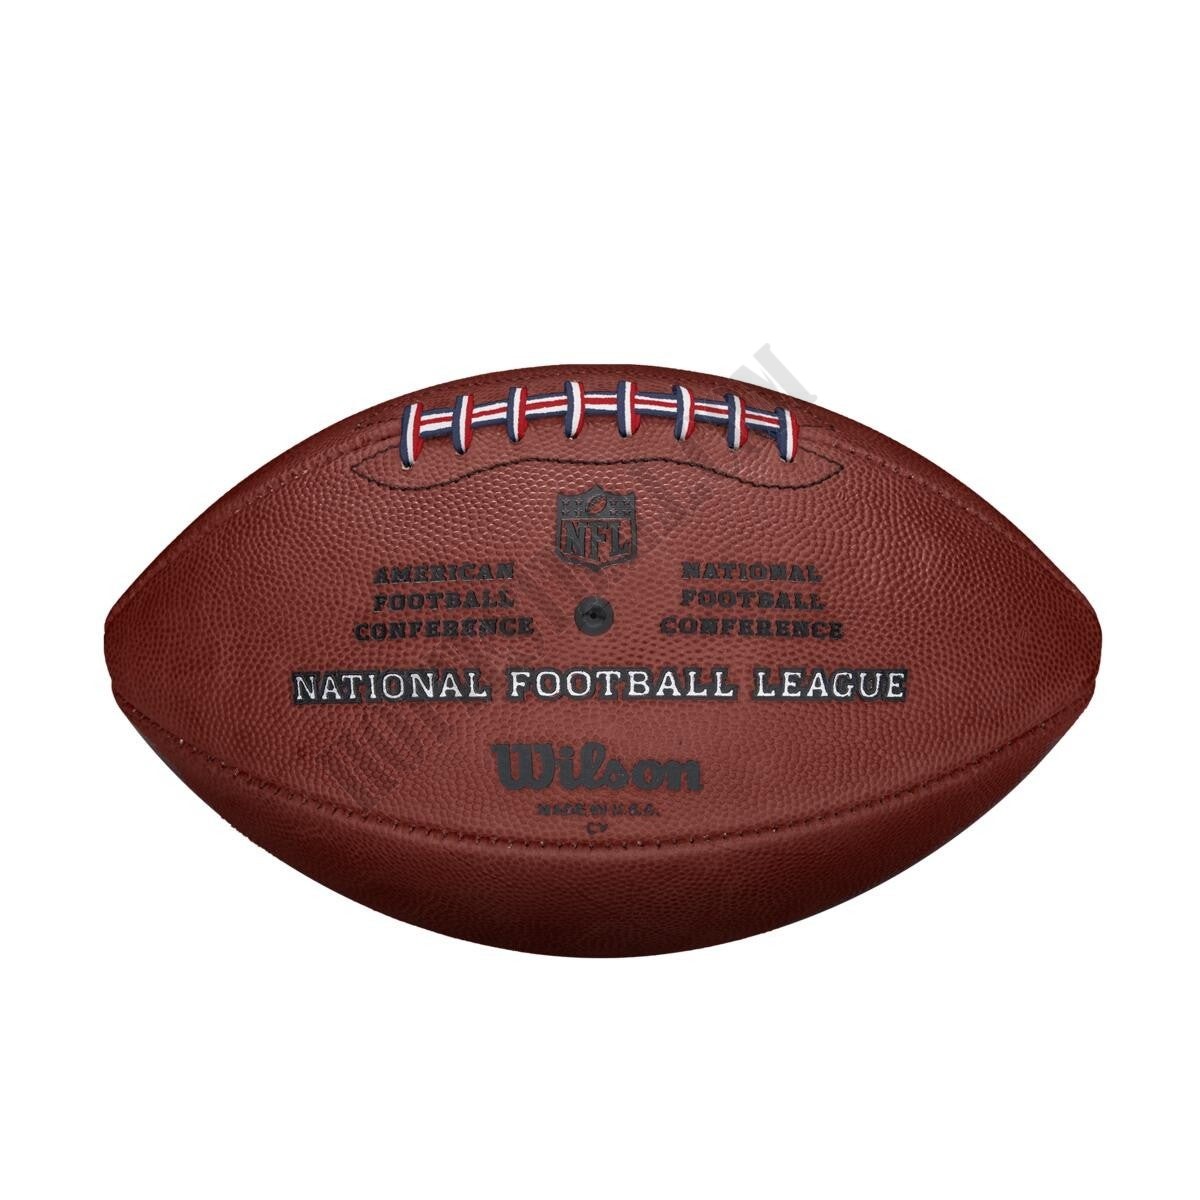 The Duke NFL Football Limited Edition - Wilson Discount Store - -1